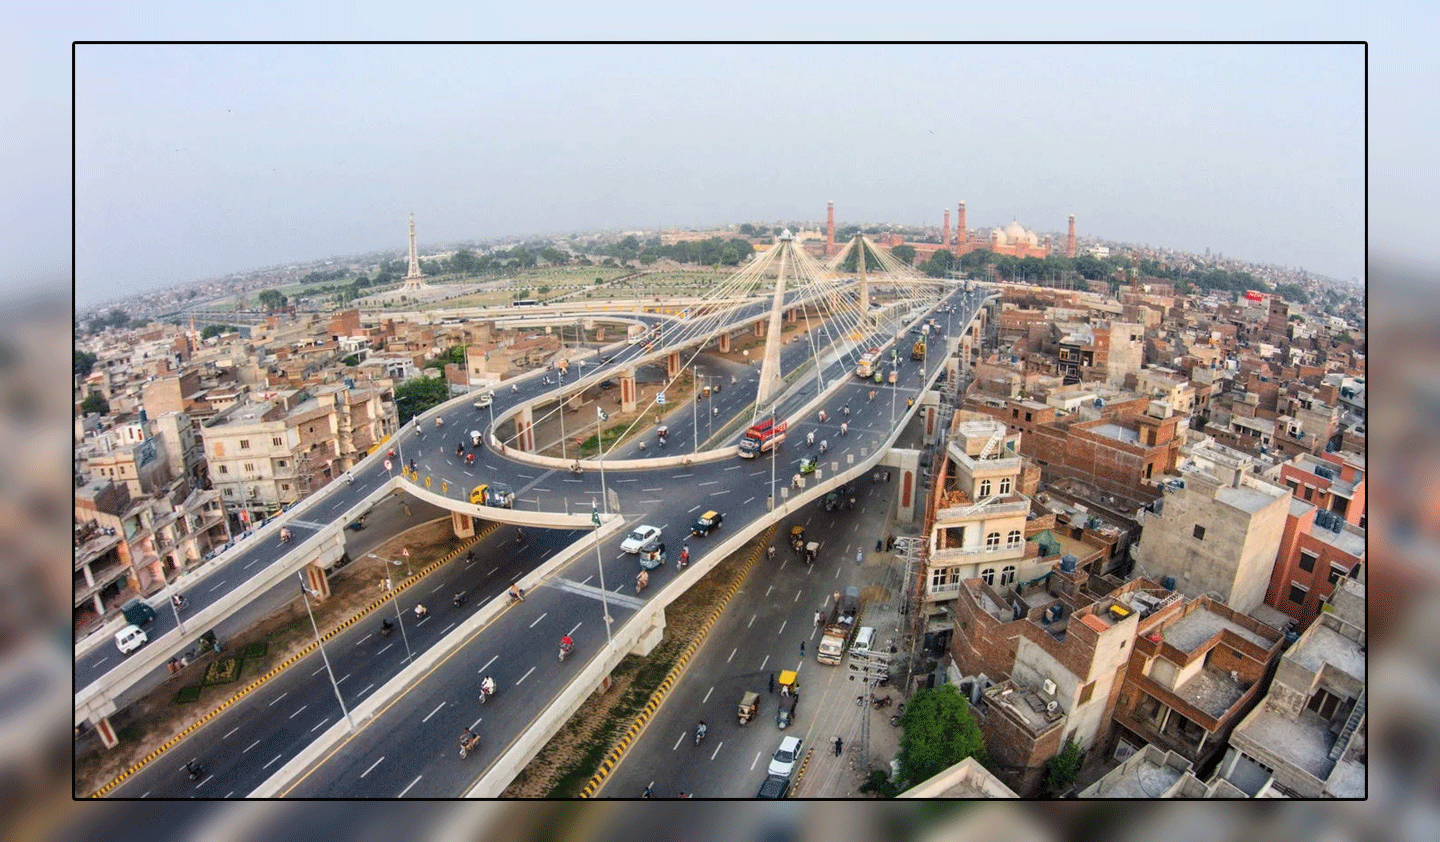 A significant amount of Rs. 28.3 billion has been allocated in the budget for development projects in Lahore